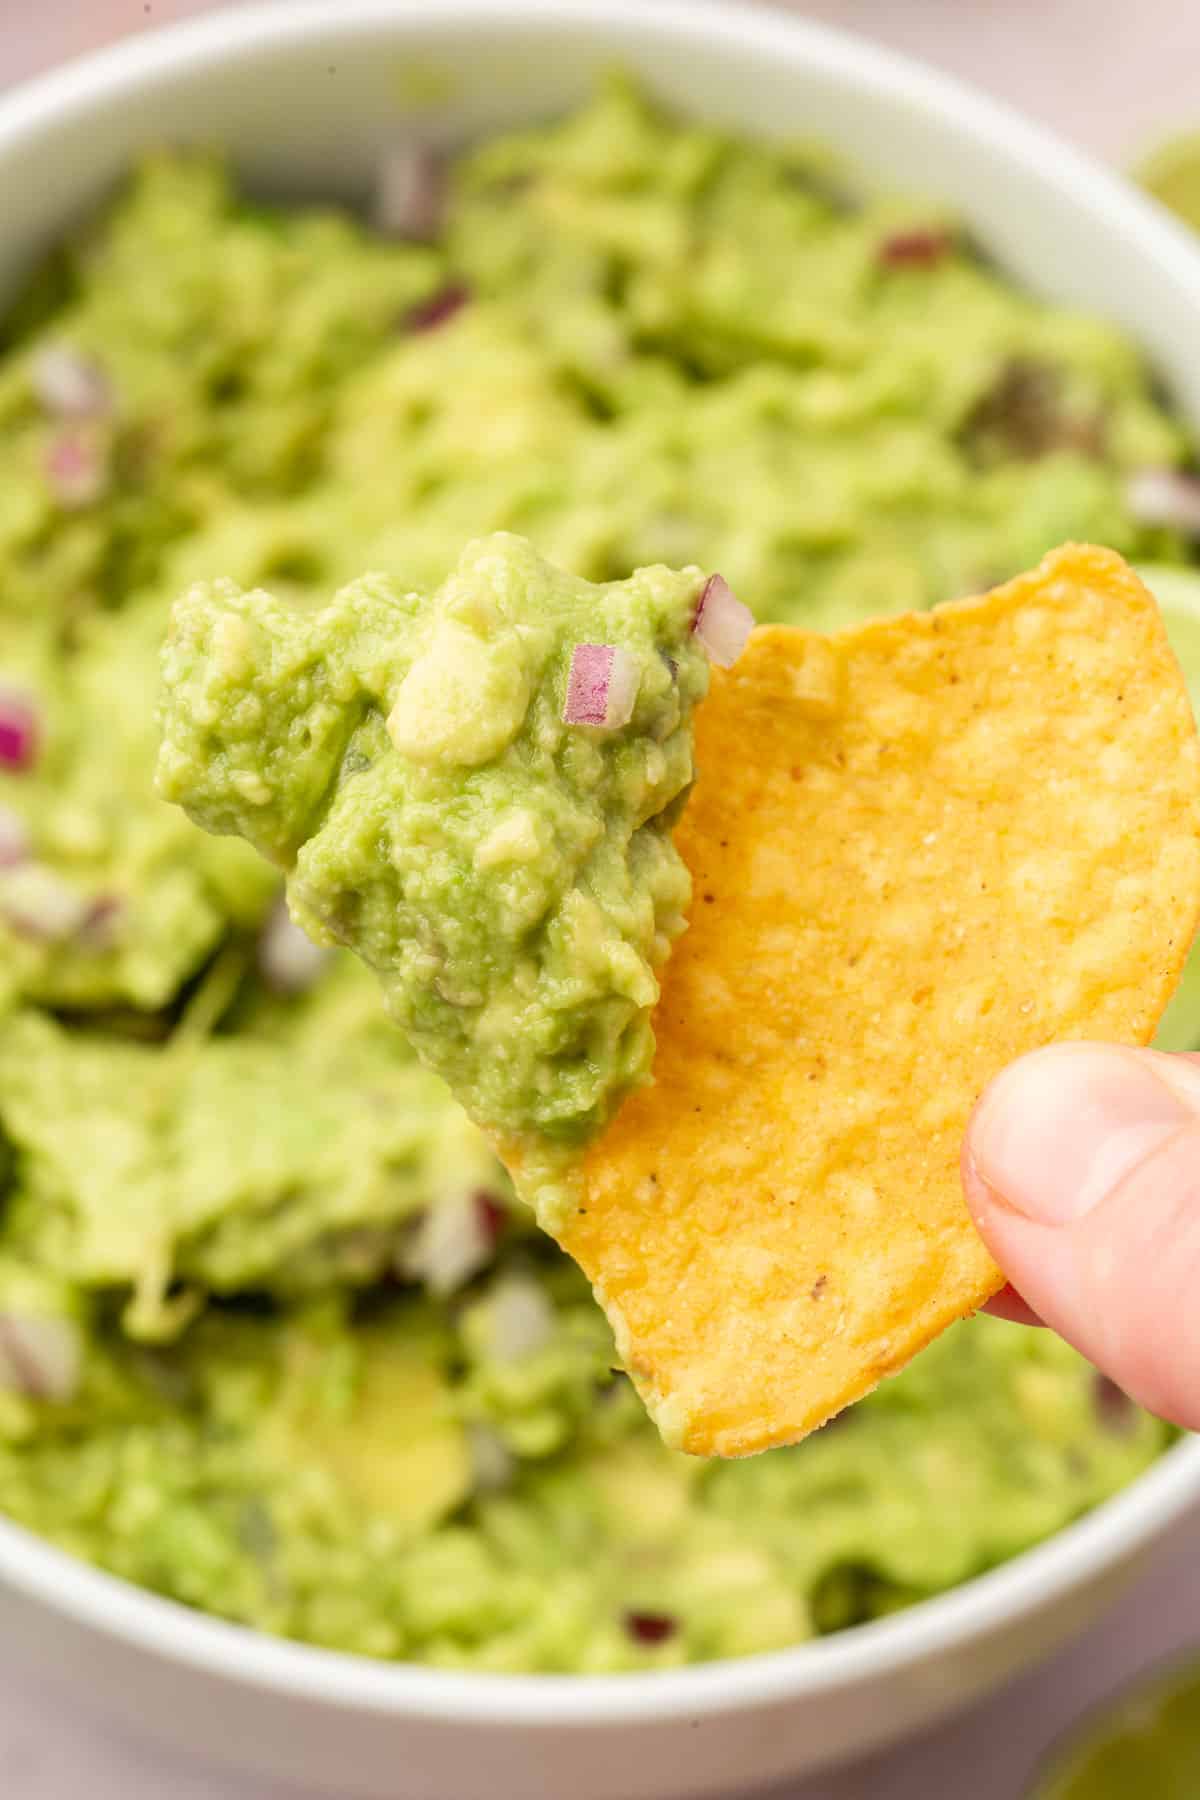 A hand holding a tortilla chip dipped in guacamole over a bowl of more guacamole.